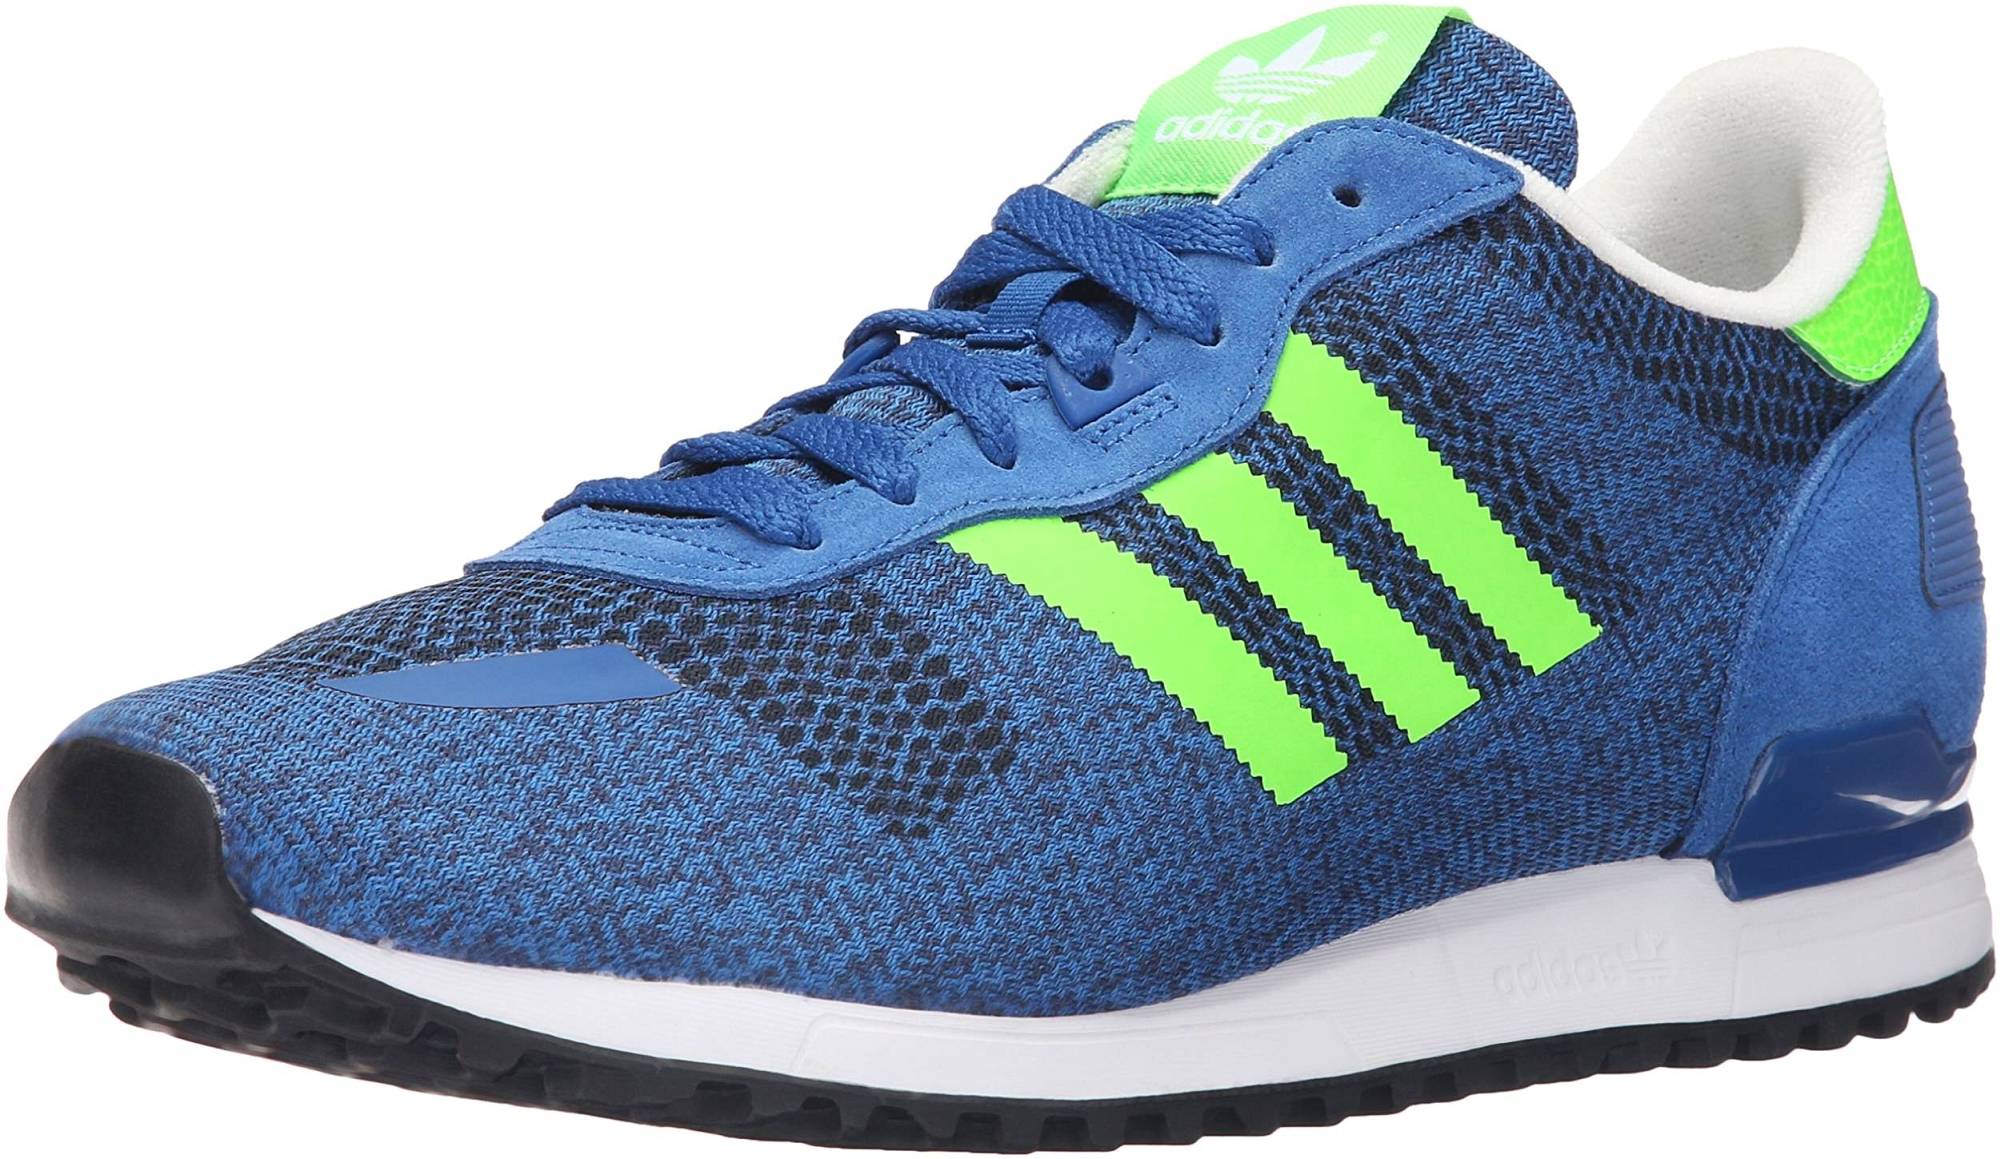 ZX 700 IM color